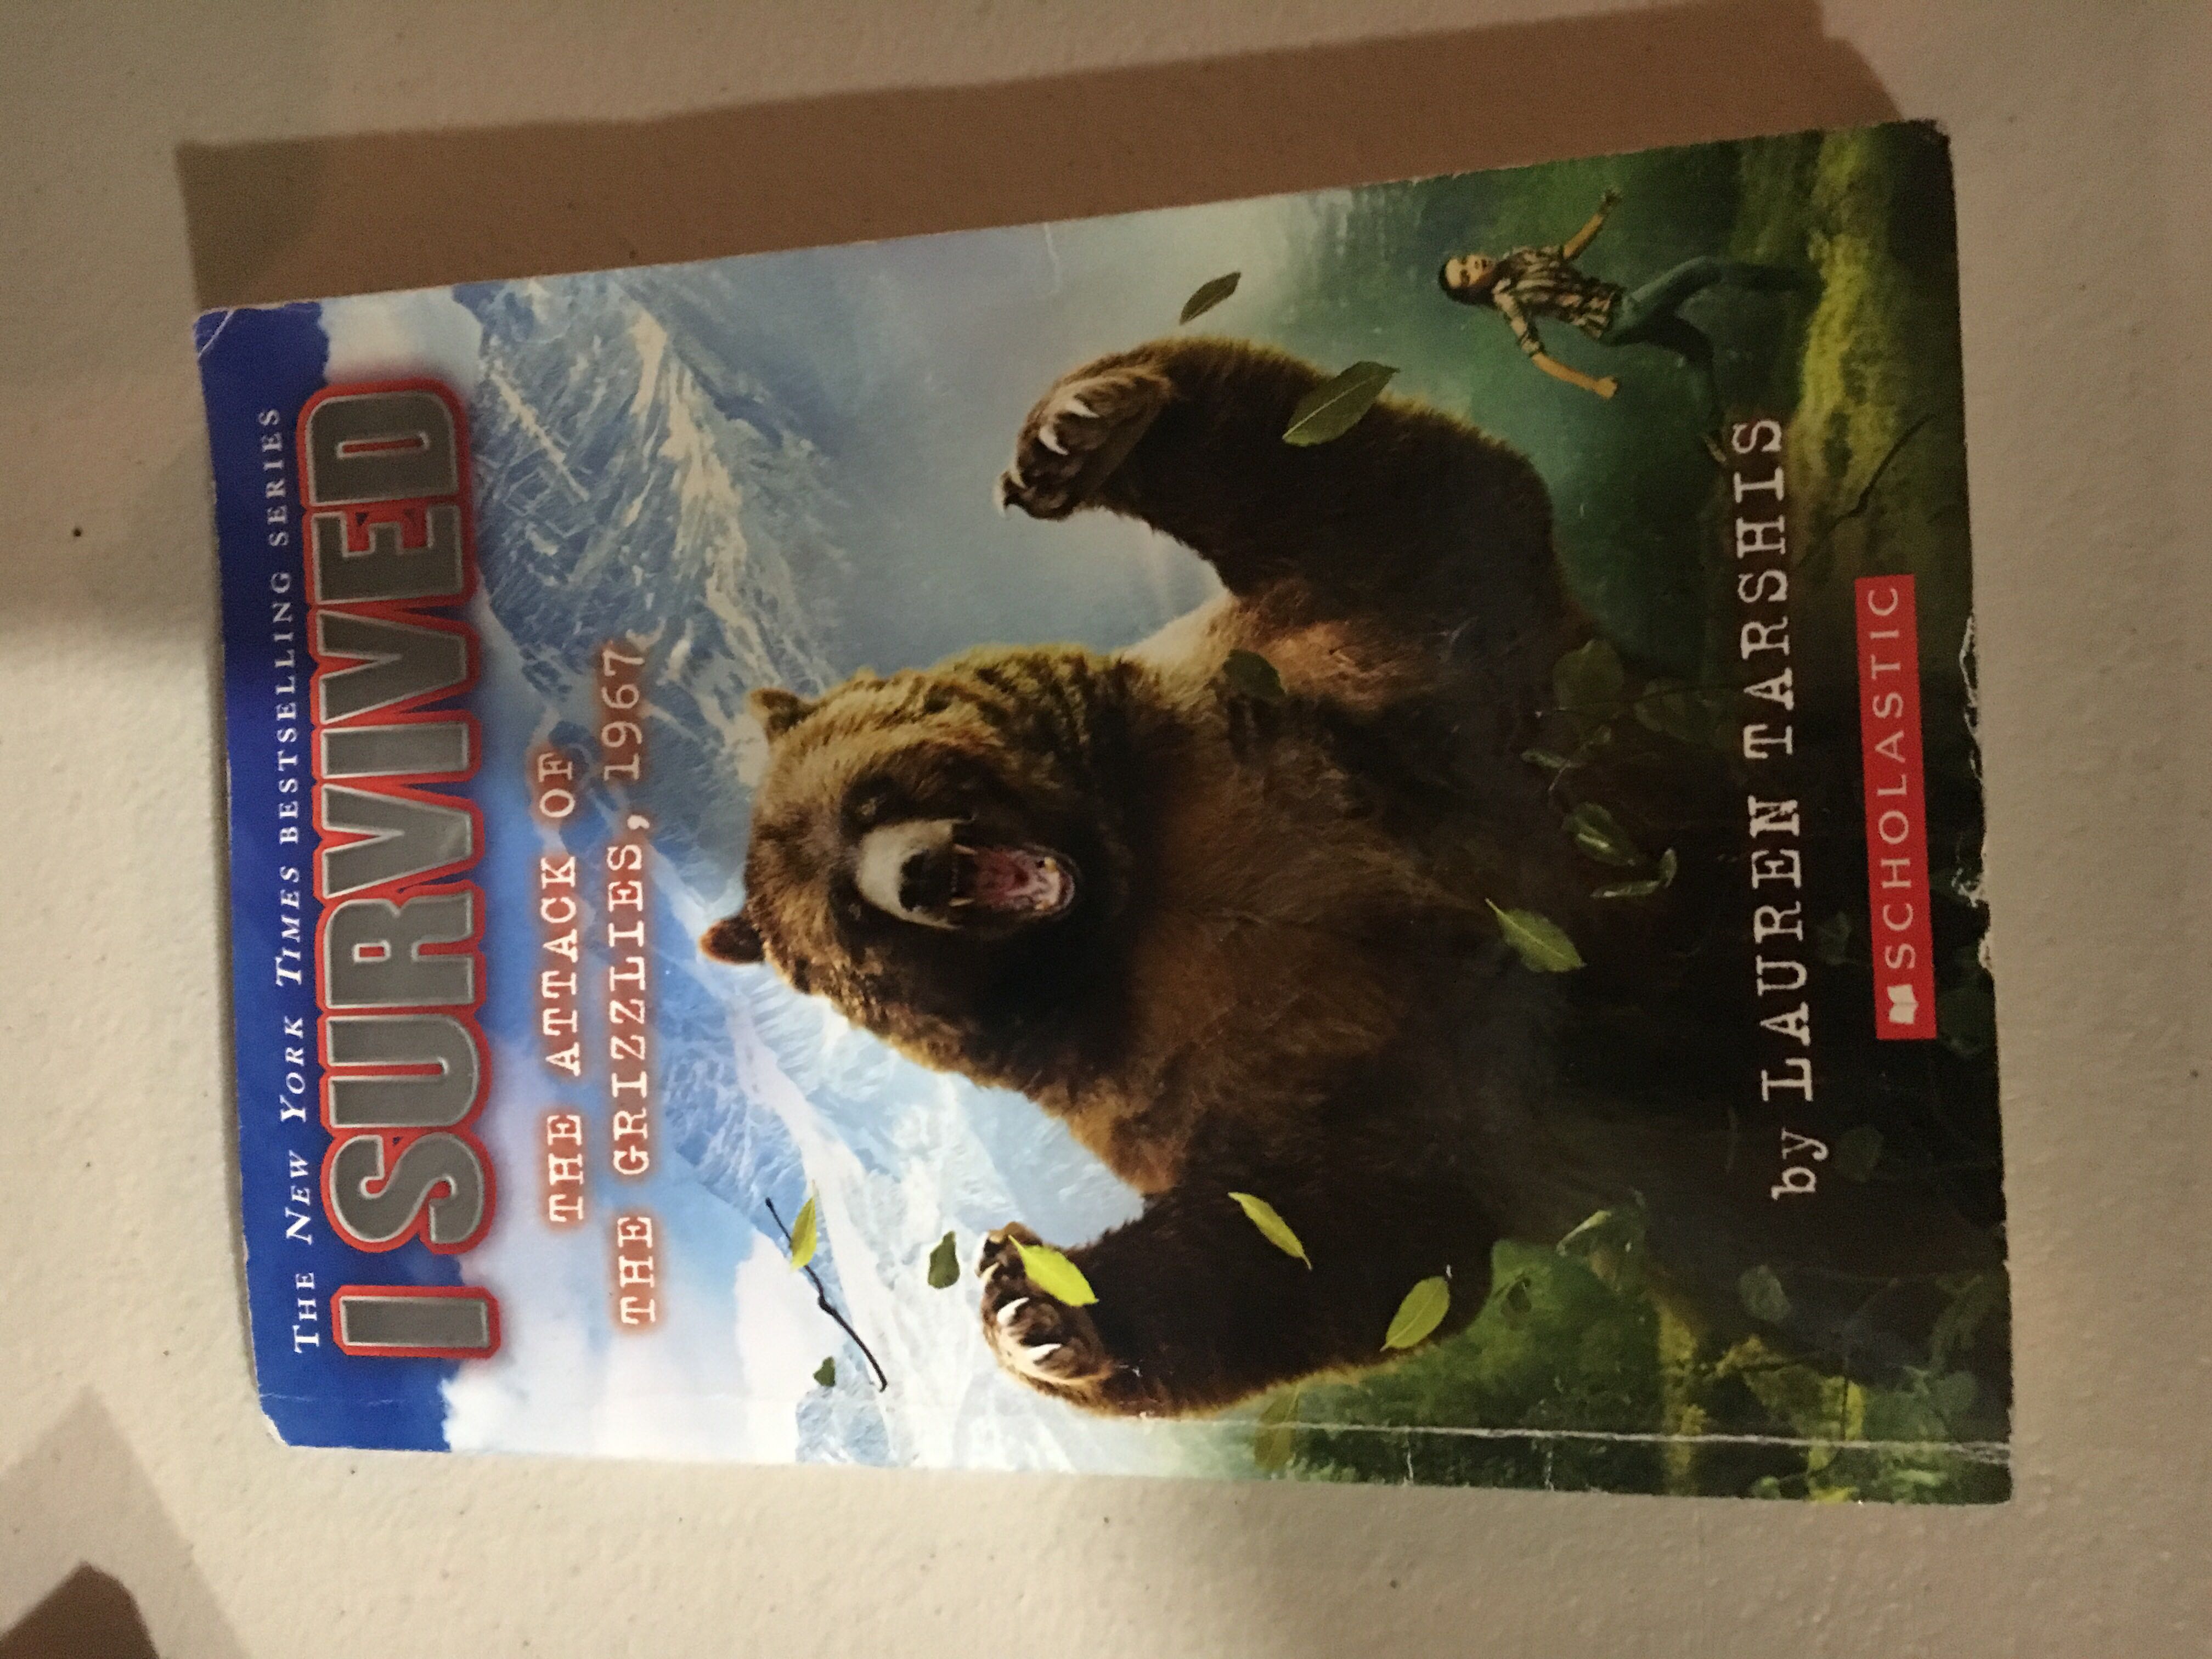 I Survived the Attack of the Grizzlies, 1967 (I Survived #17) - Lauren Tarshis (Scholastic Paperbacks - Paperback) book collectible [Barcode 9780545919821] - Main Image 1